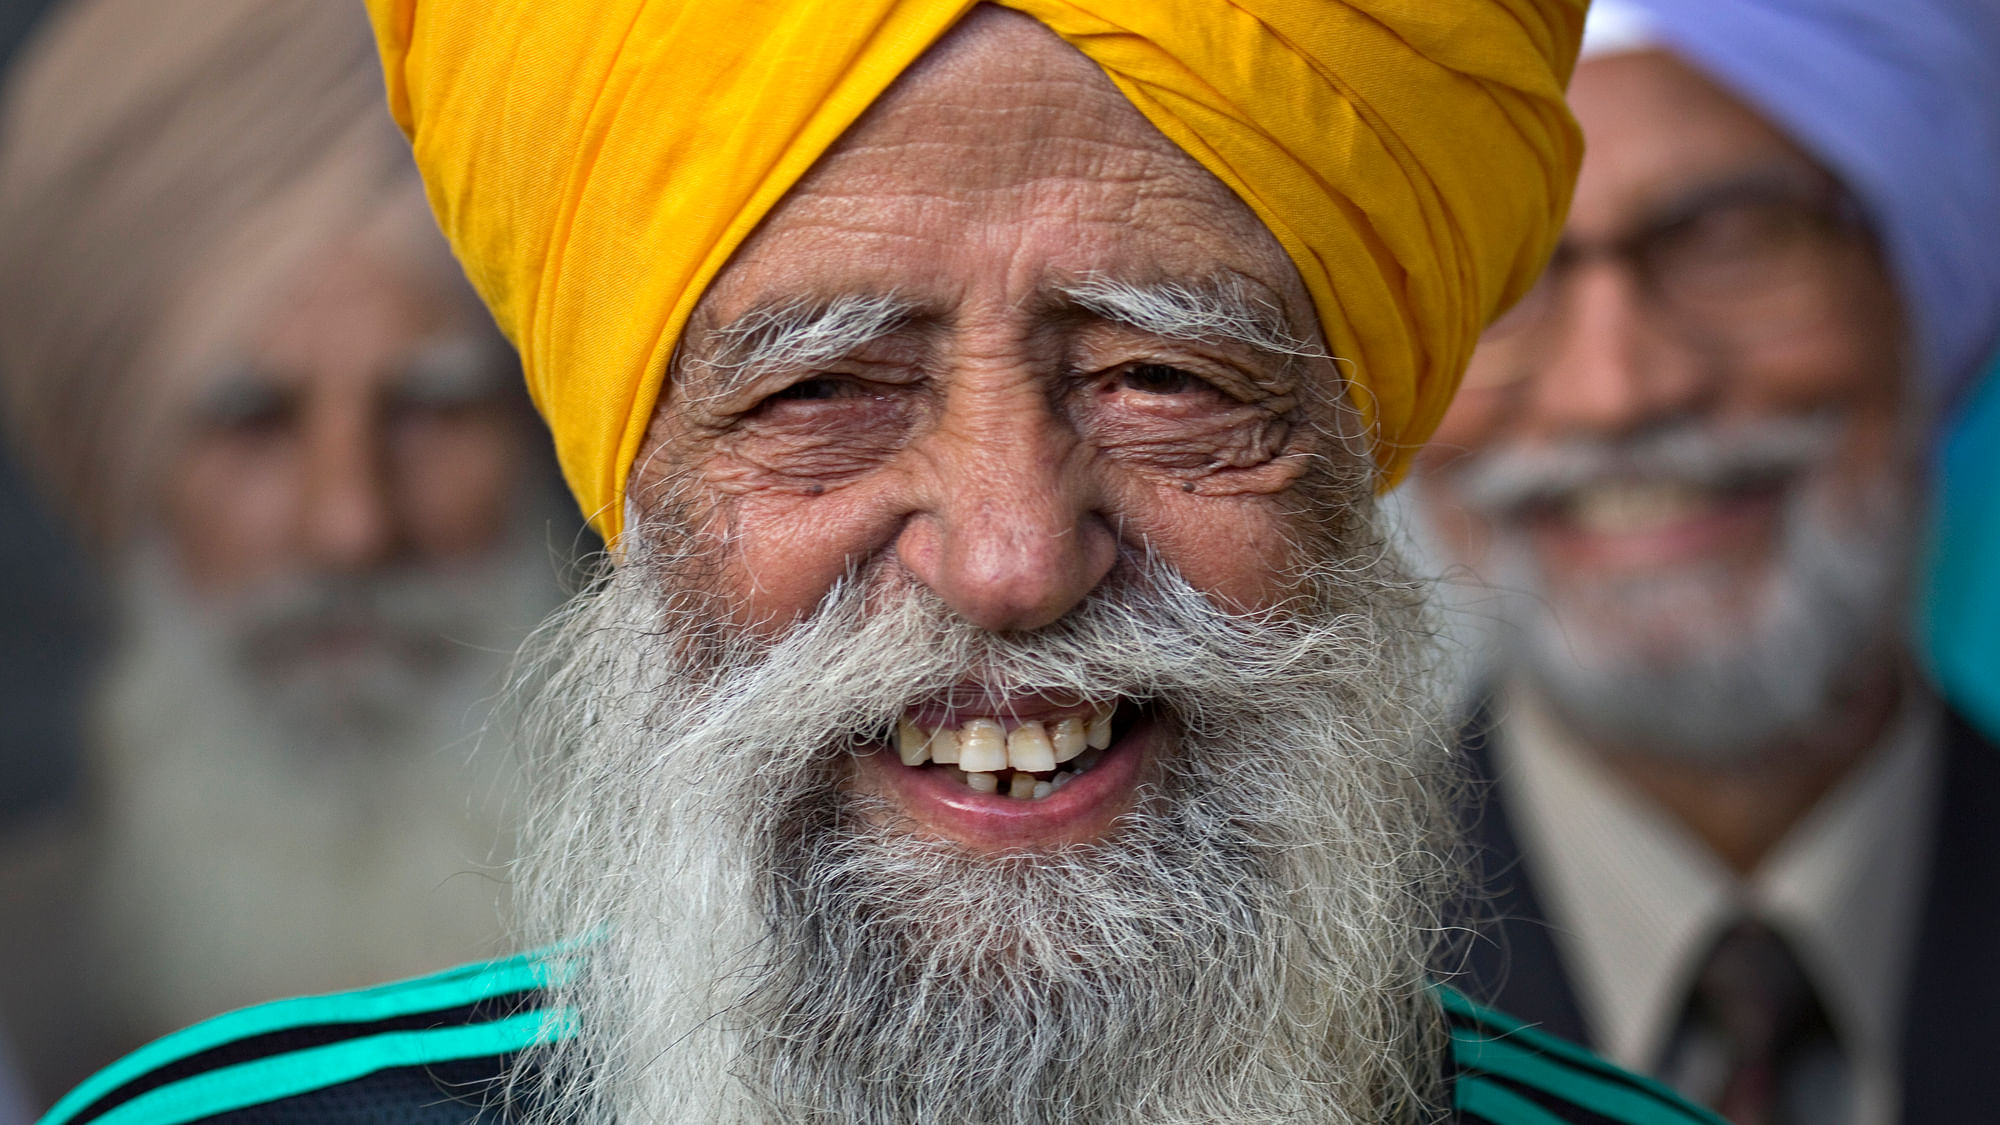  Fauja Singh is all smiles before taking part in the inaugural Surrey World Music Marathon in 2012. (Photo: Reuters)